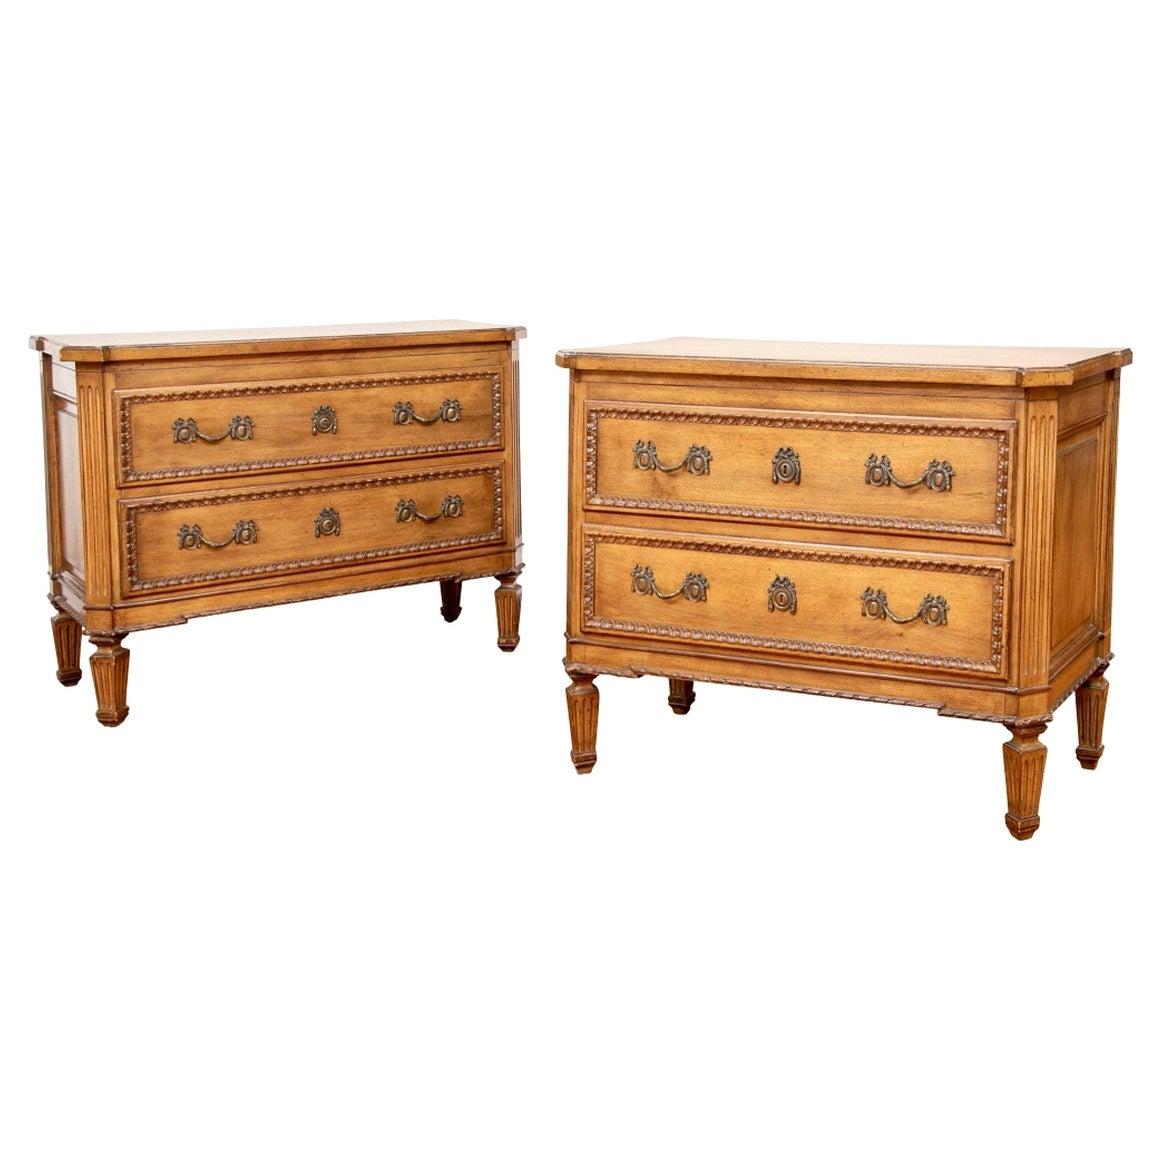 Pair of Fine French Carved Chests by Auffray & Co.